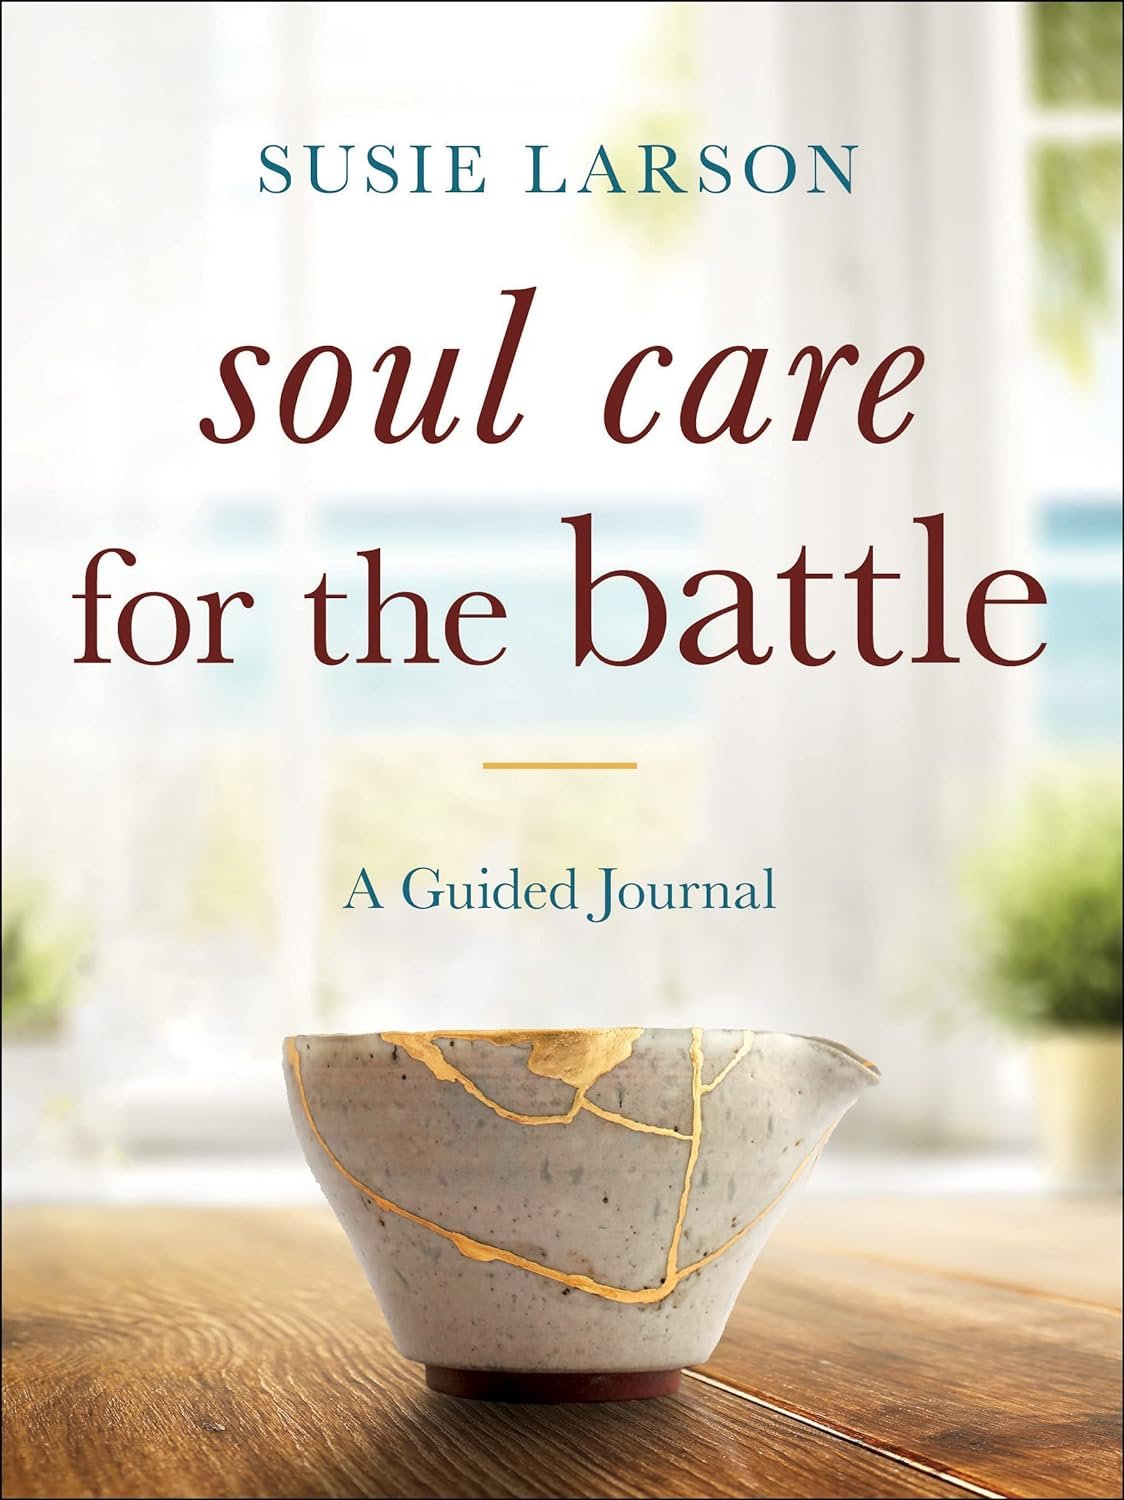 Soul Care for the Battle: A Guided Journal